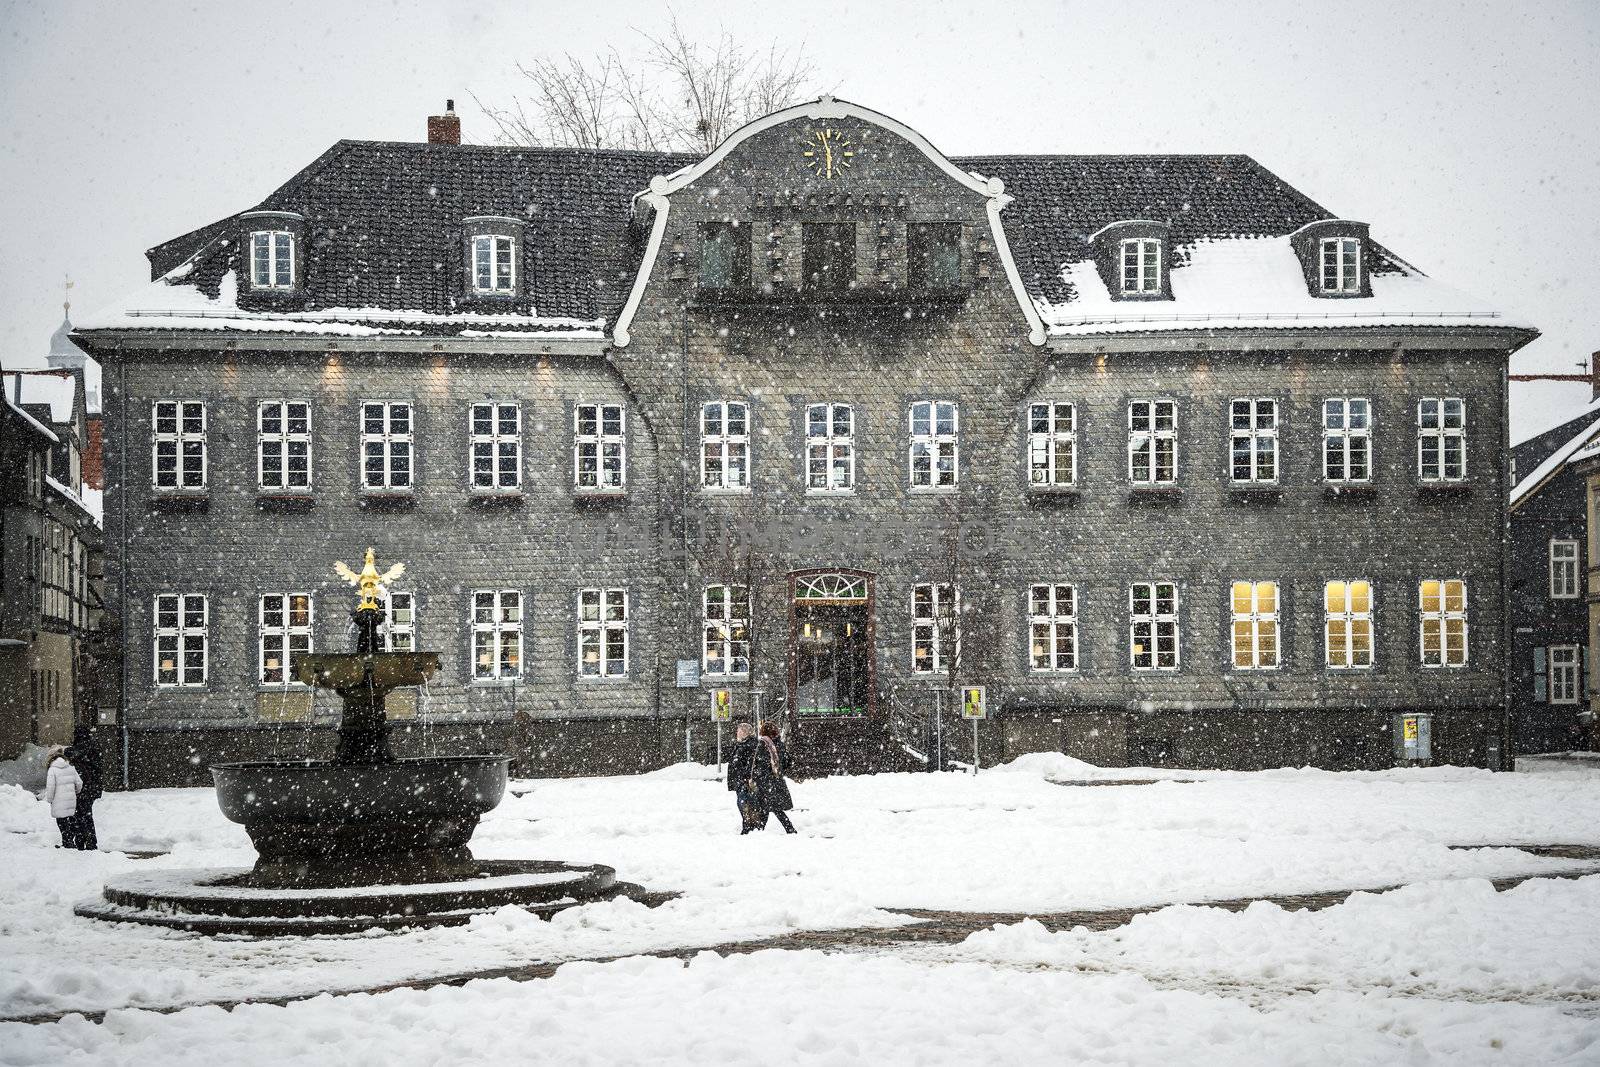 House with slate covered with snow in winter in Goslar, Germany